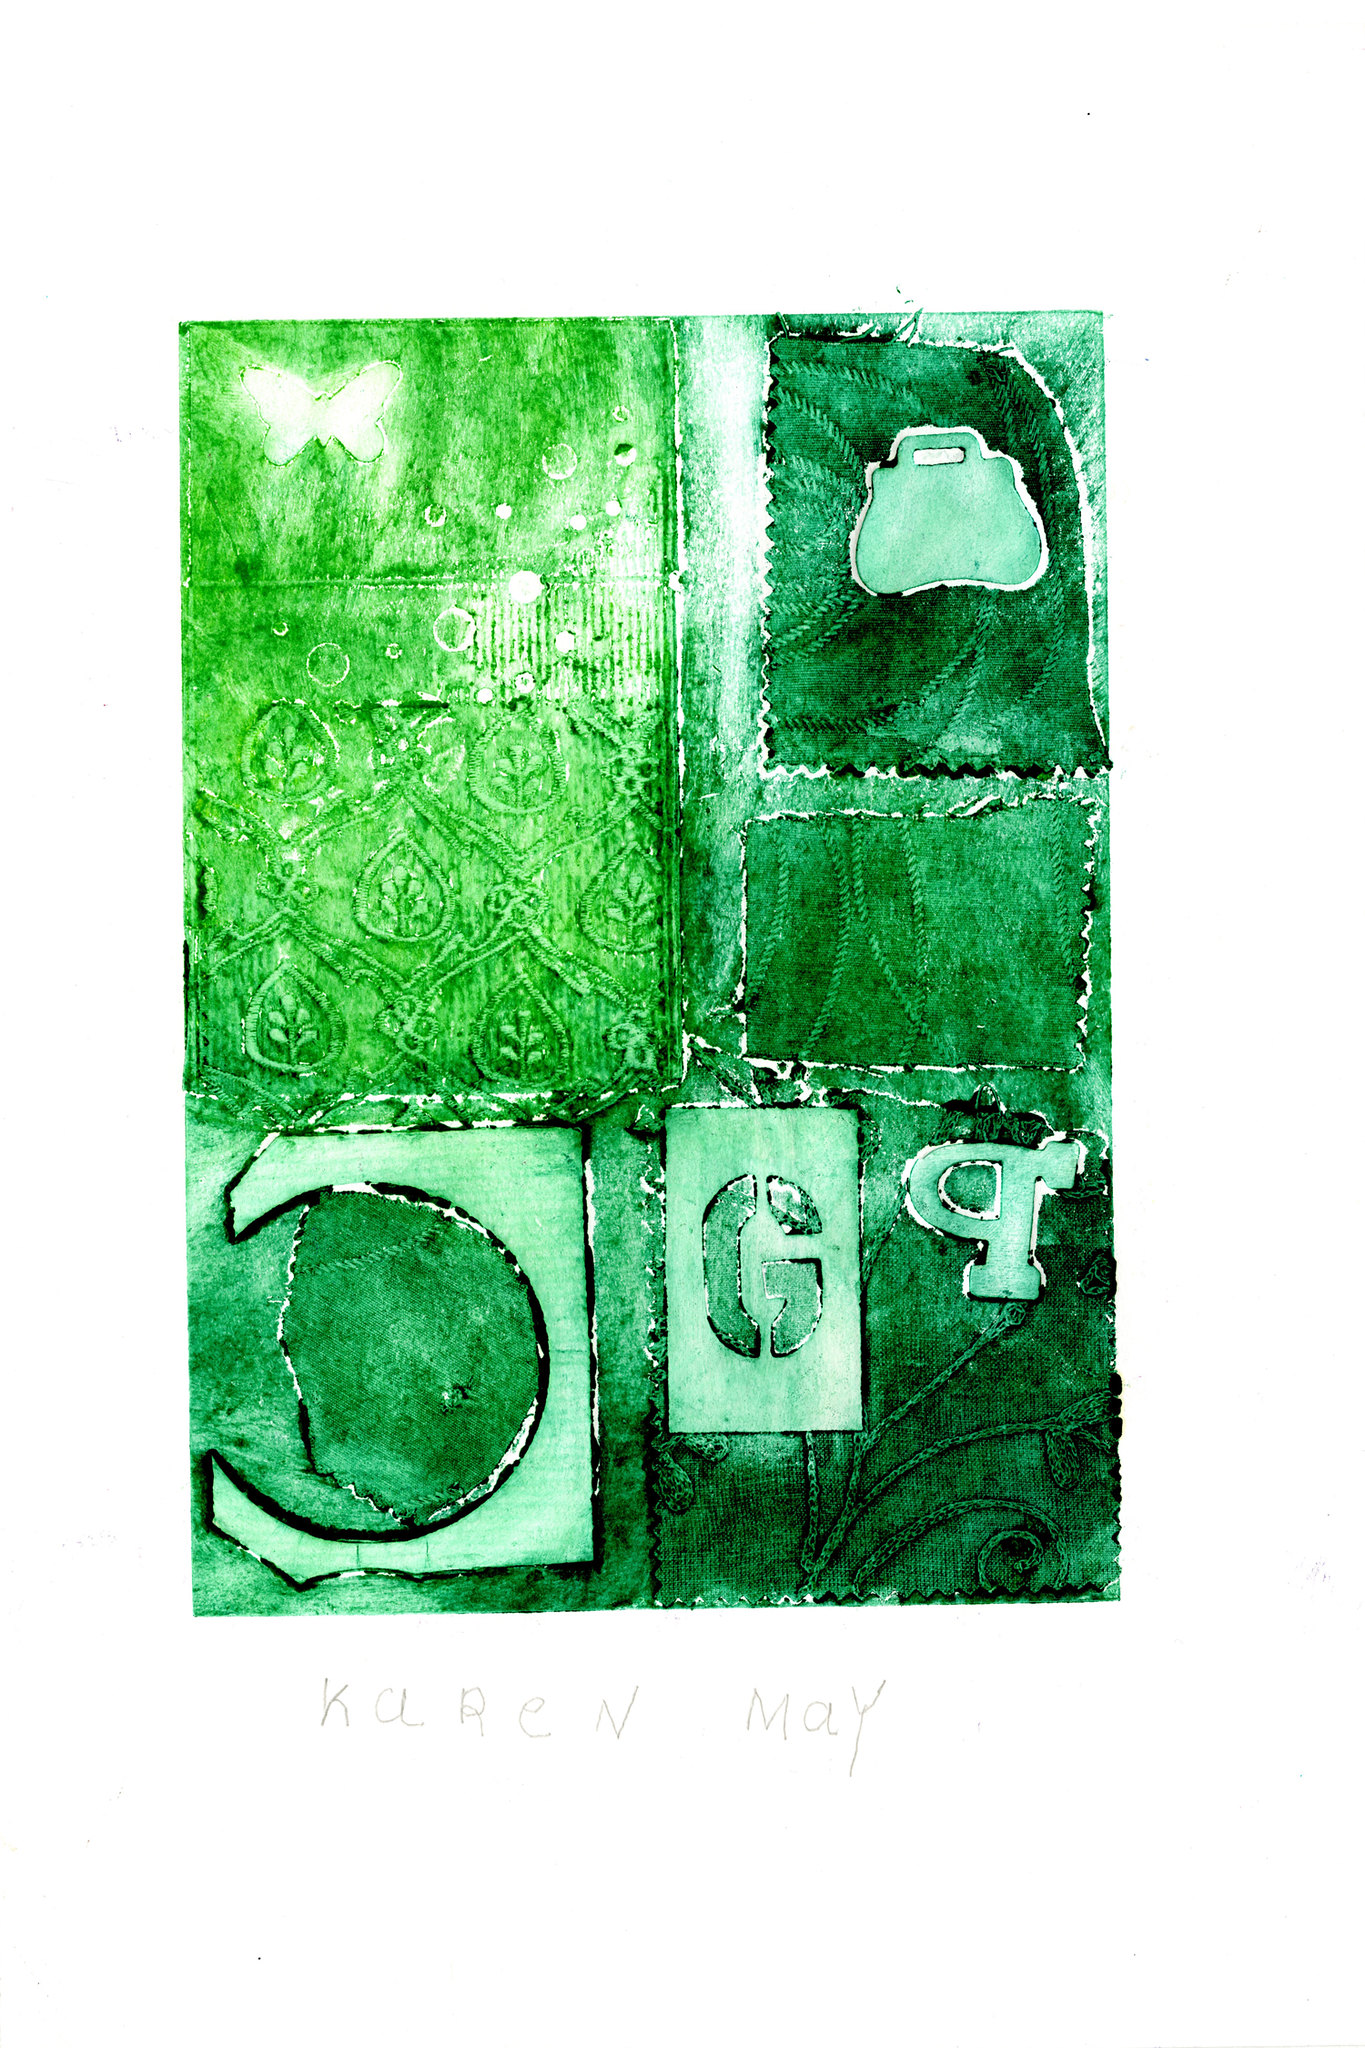 monochromatic abstract print with raised letters G and backwards P and C near the bottom and squares and other shapes at the top